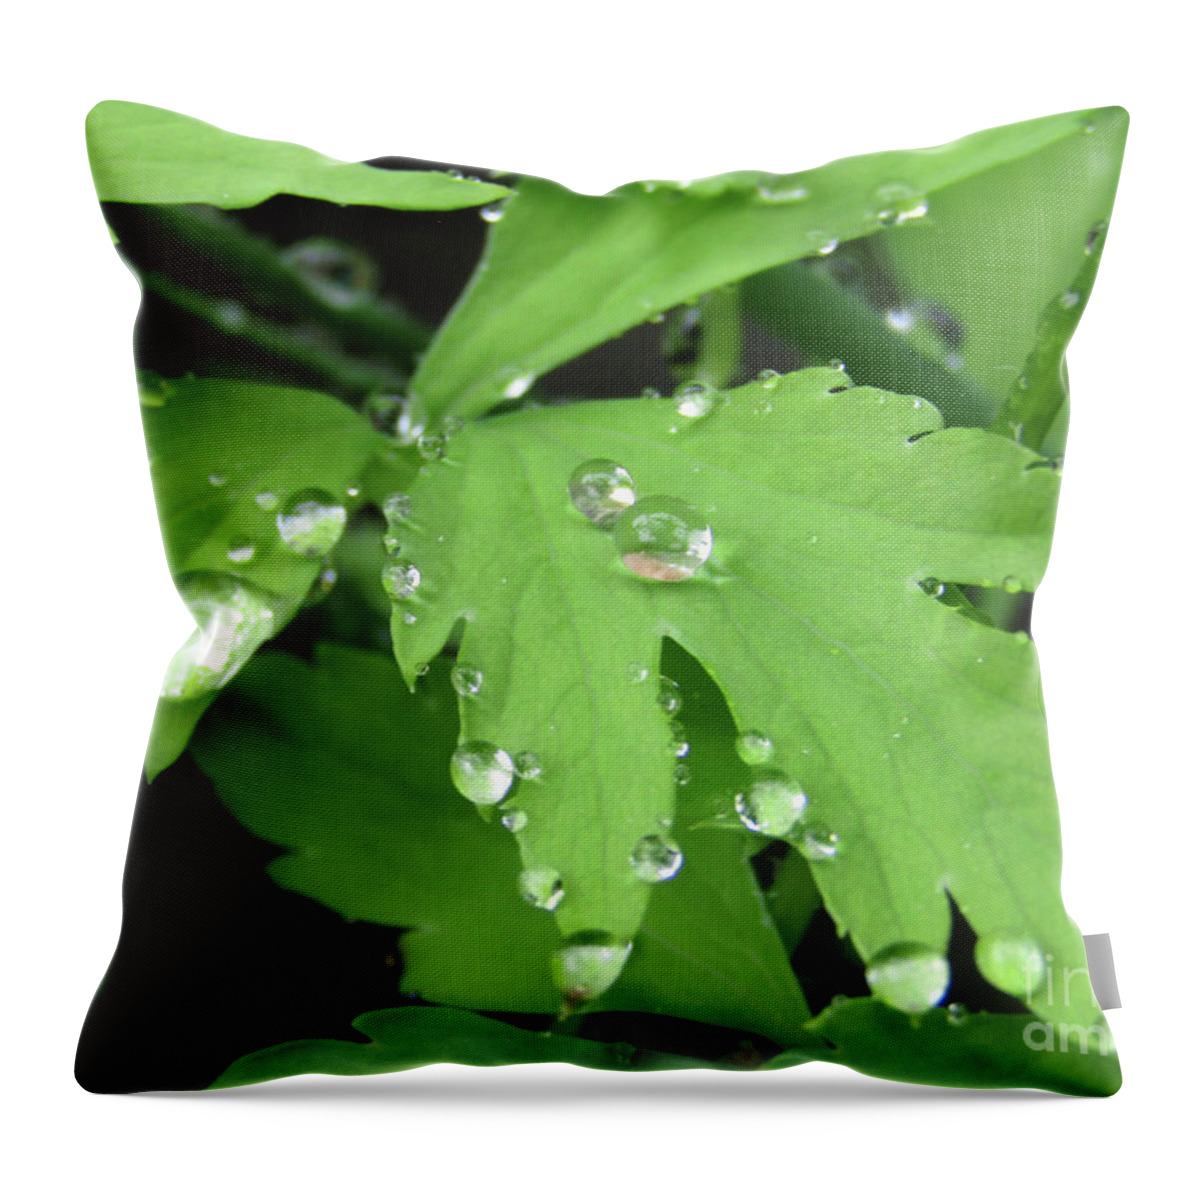 Poppy Throw Pillow featuring the photograph Drops on Poppy Leaves by Kim Tran